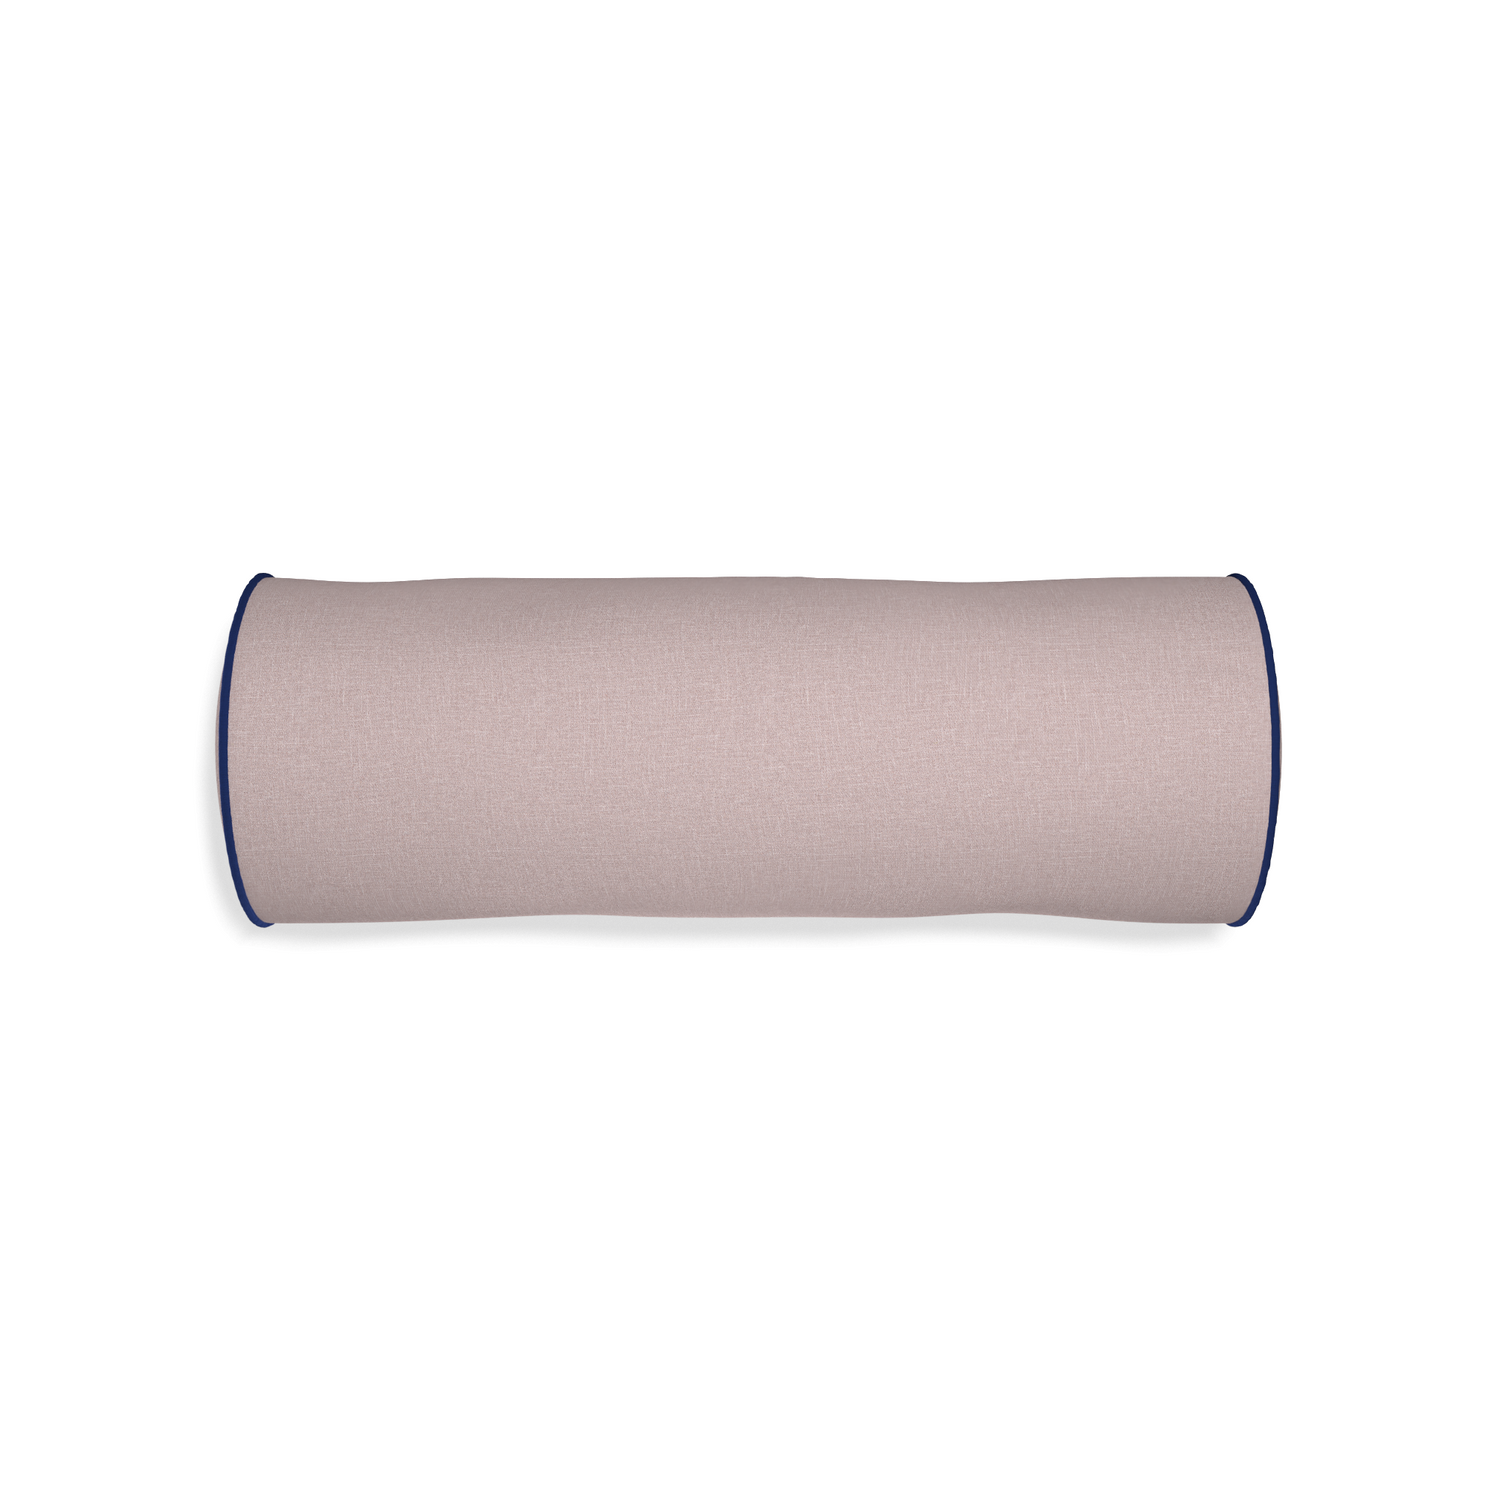 Bolster orchid custom mauve pinkpillow with midnight piping on white background